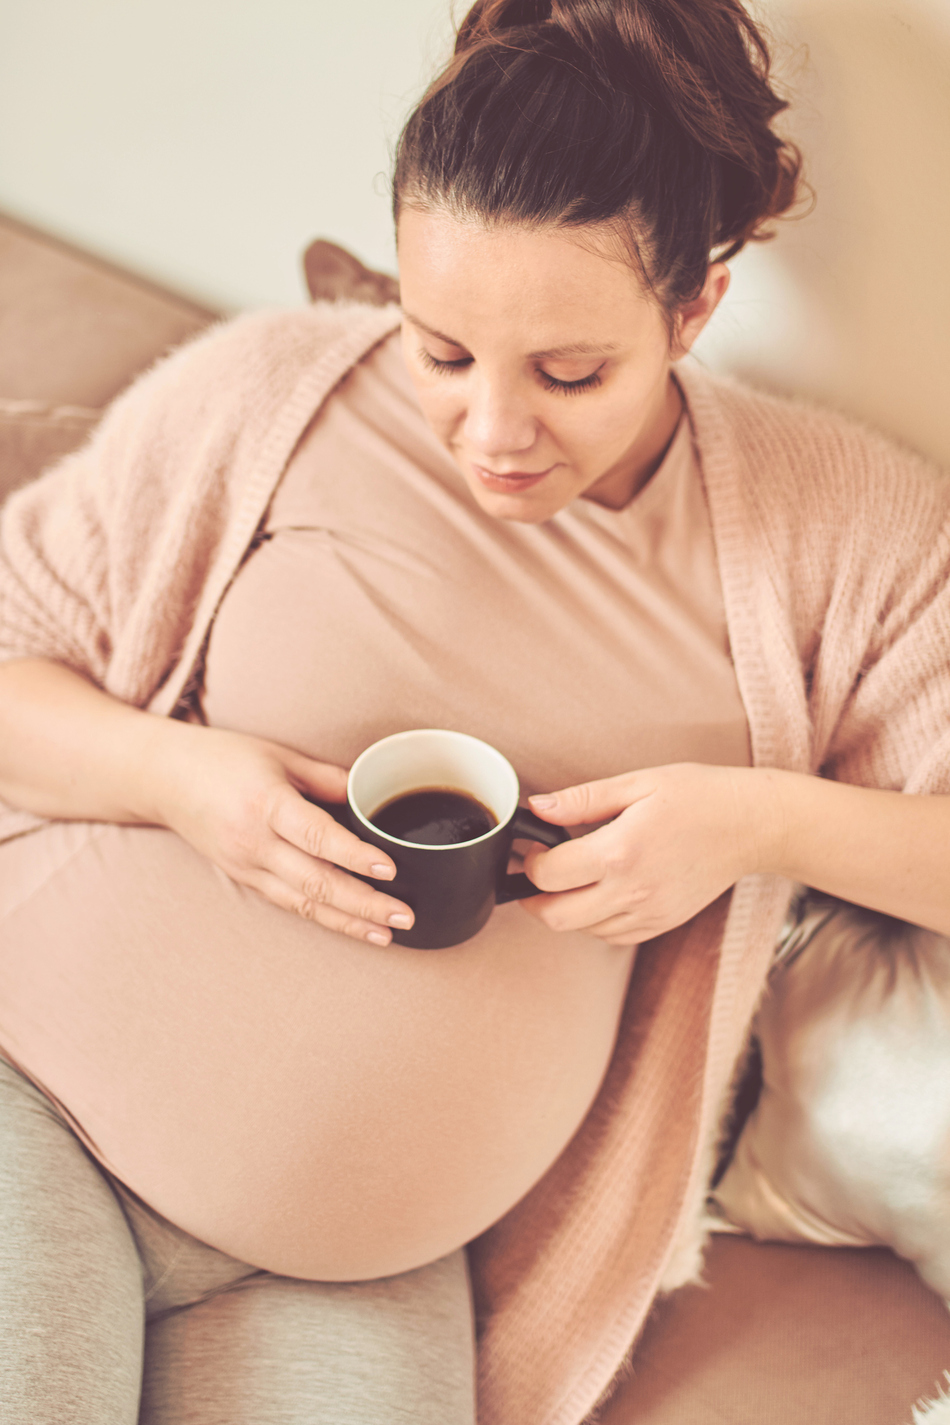 Pregnancy Myths & Misconceptions